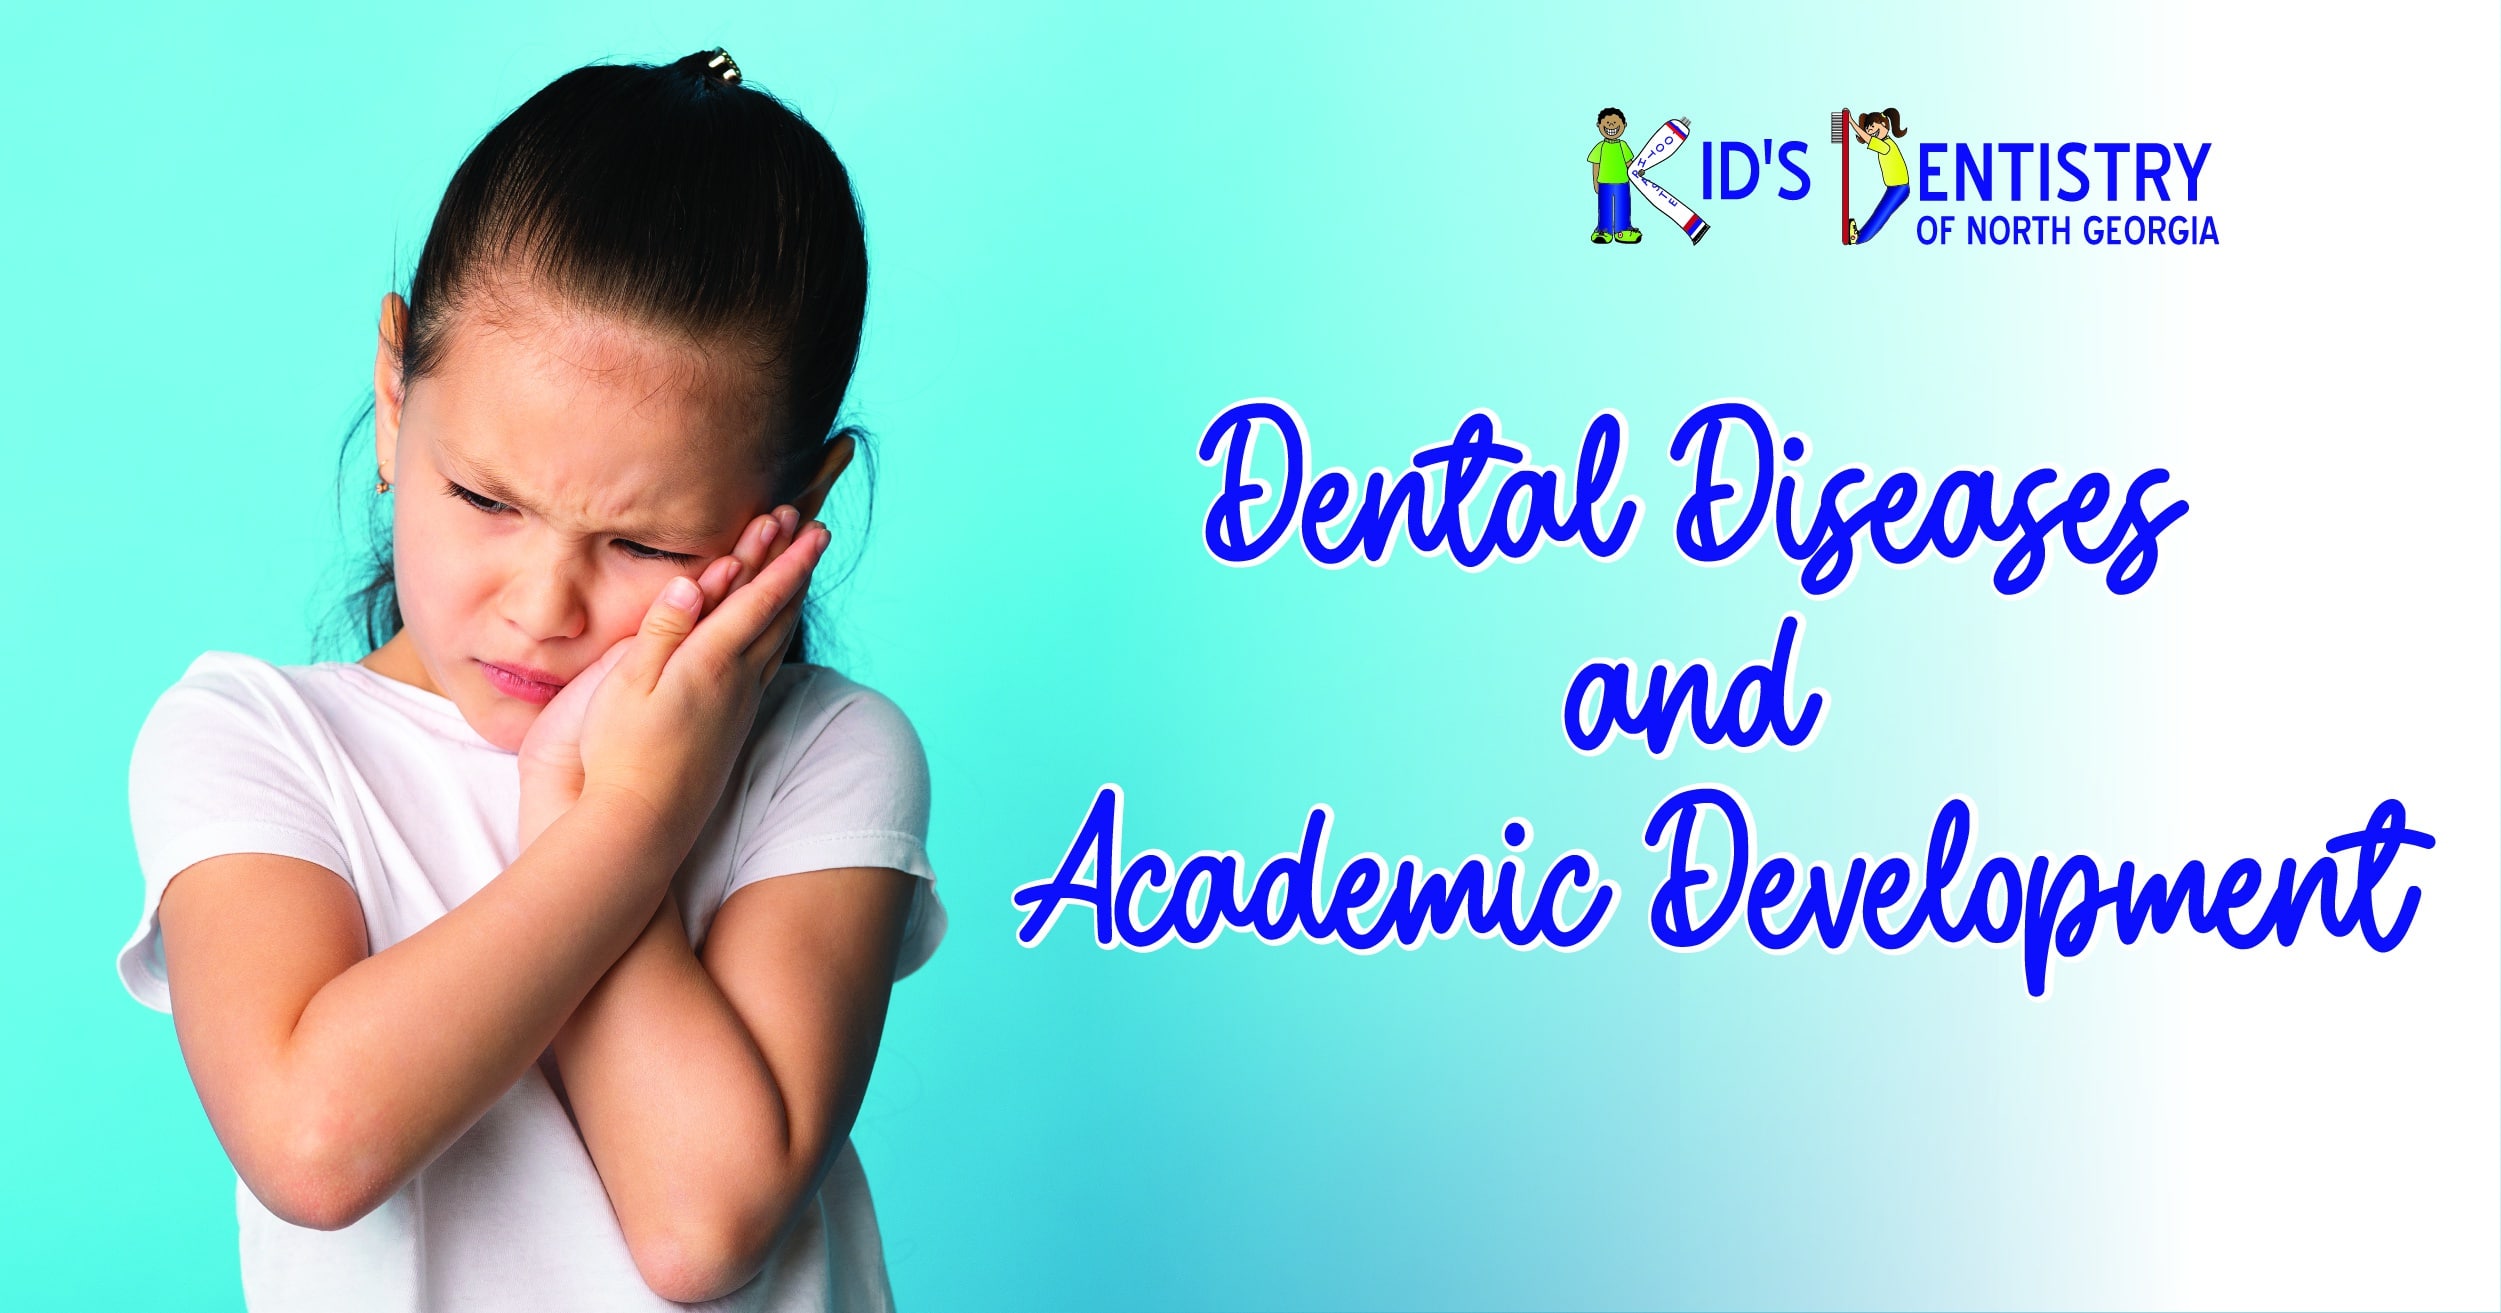 A young child winces in pain and hold the left side of her face. The superimposed text reads "Dental Diseases and Academic Development"